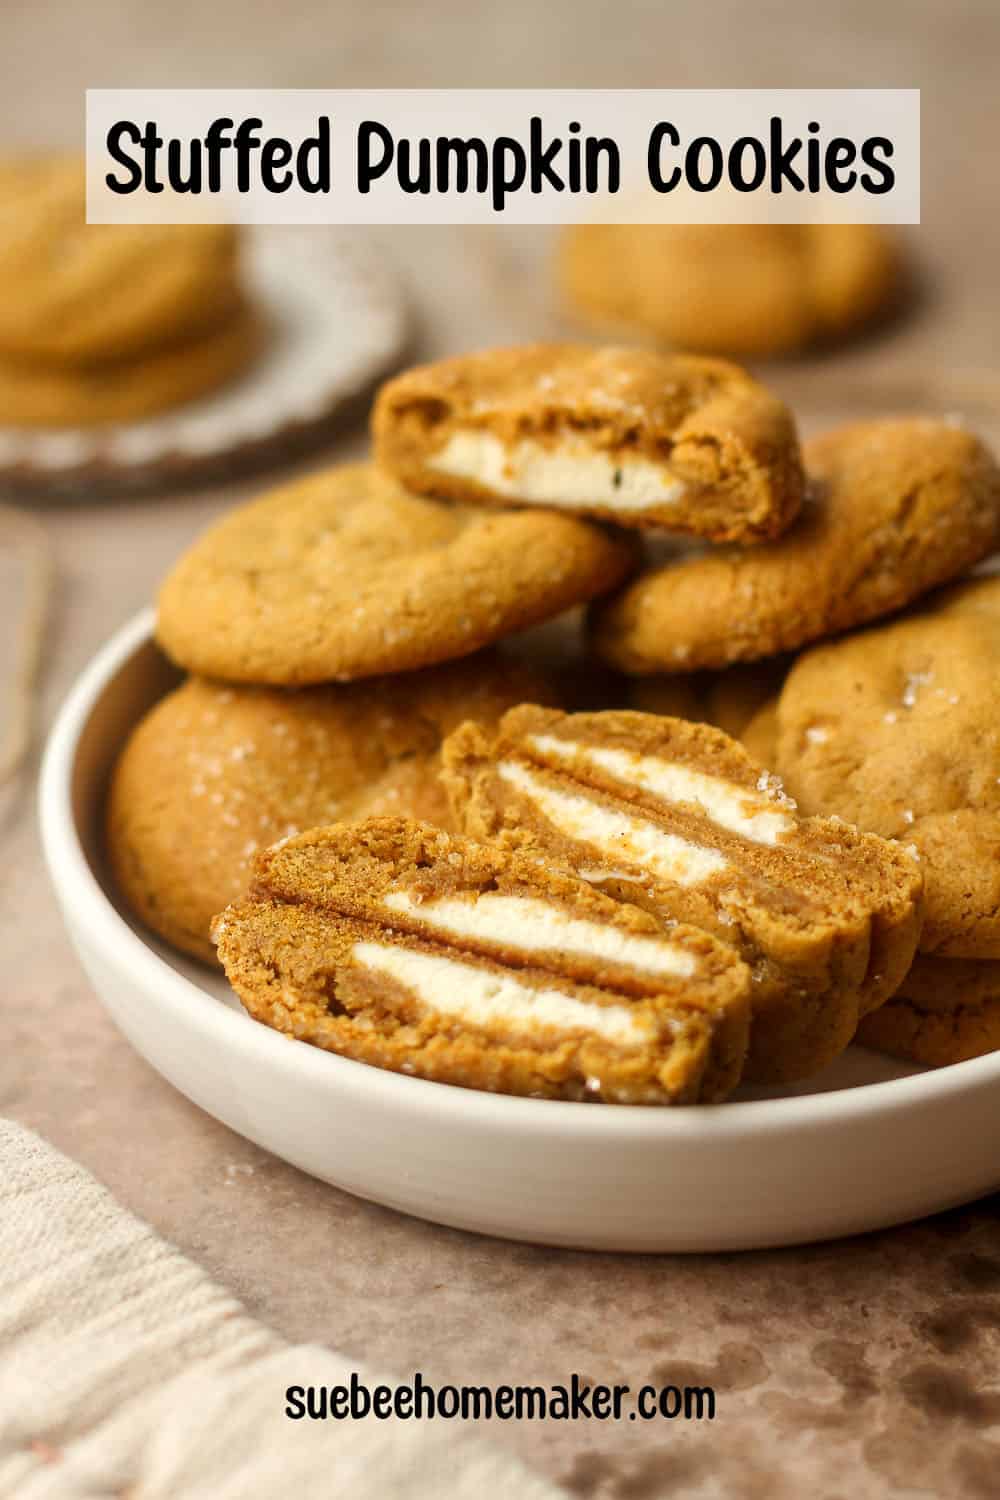 Side view of a bowl of stuffed pumpkin cookies with some cut in half.